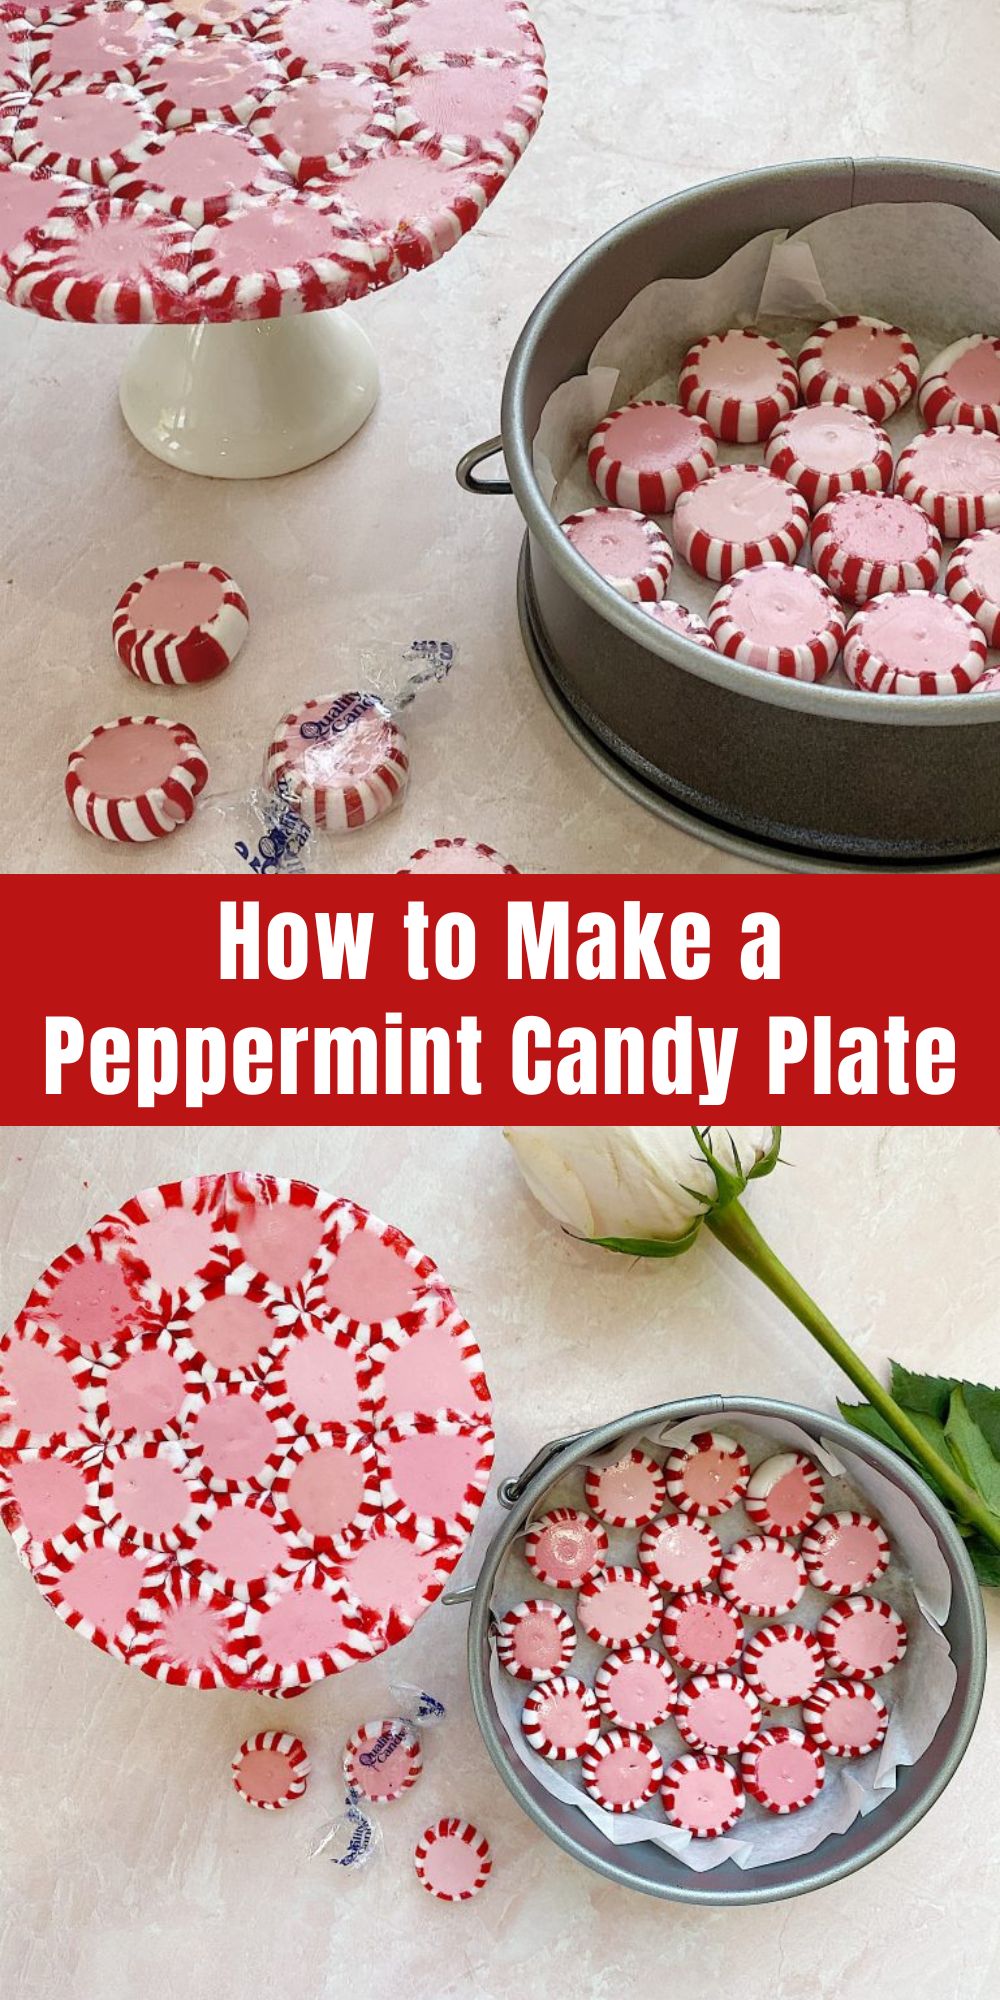 There is something so festive about peppermint candy at Christmas time. Did you know that you can use them to make a candy plate?